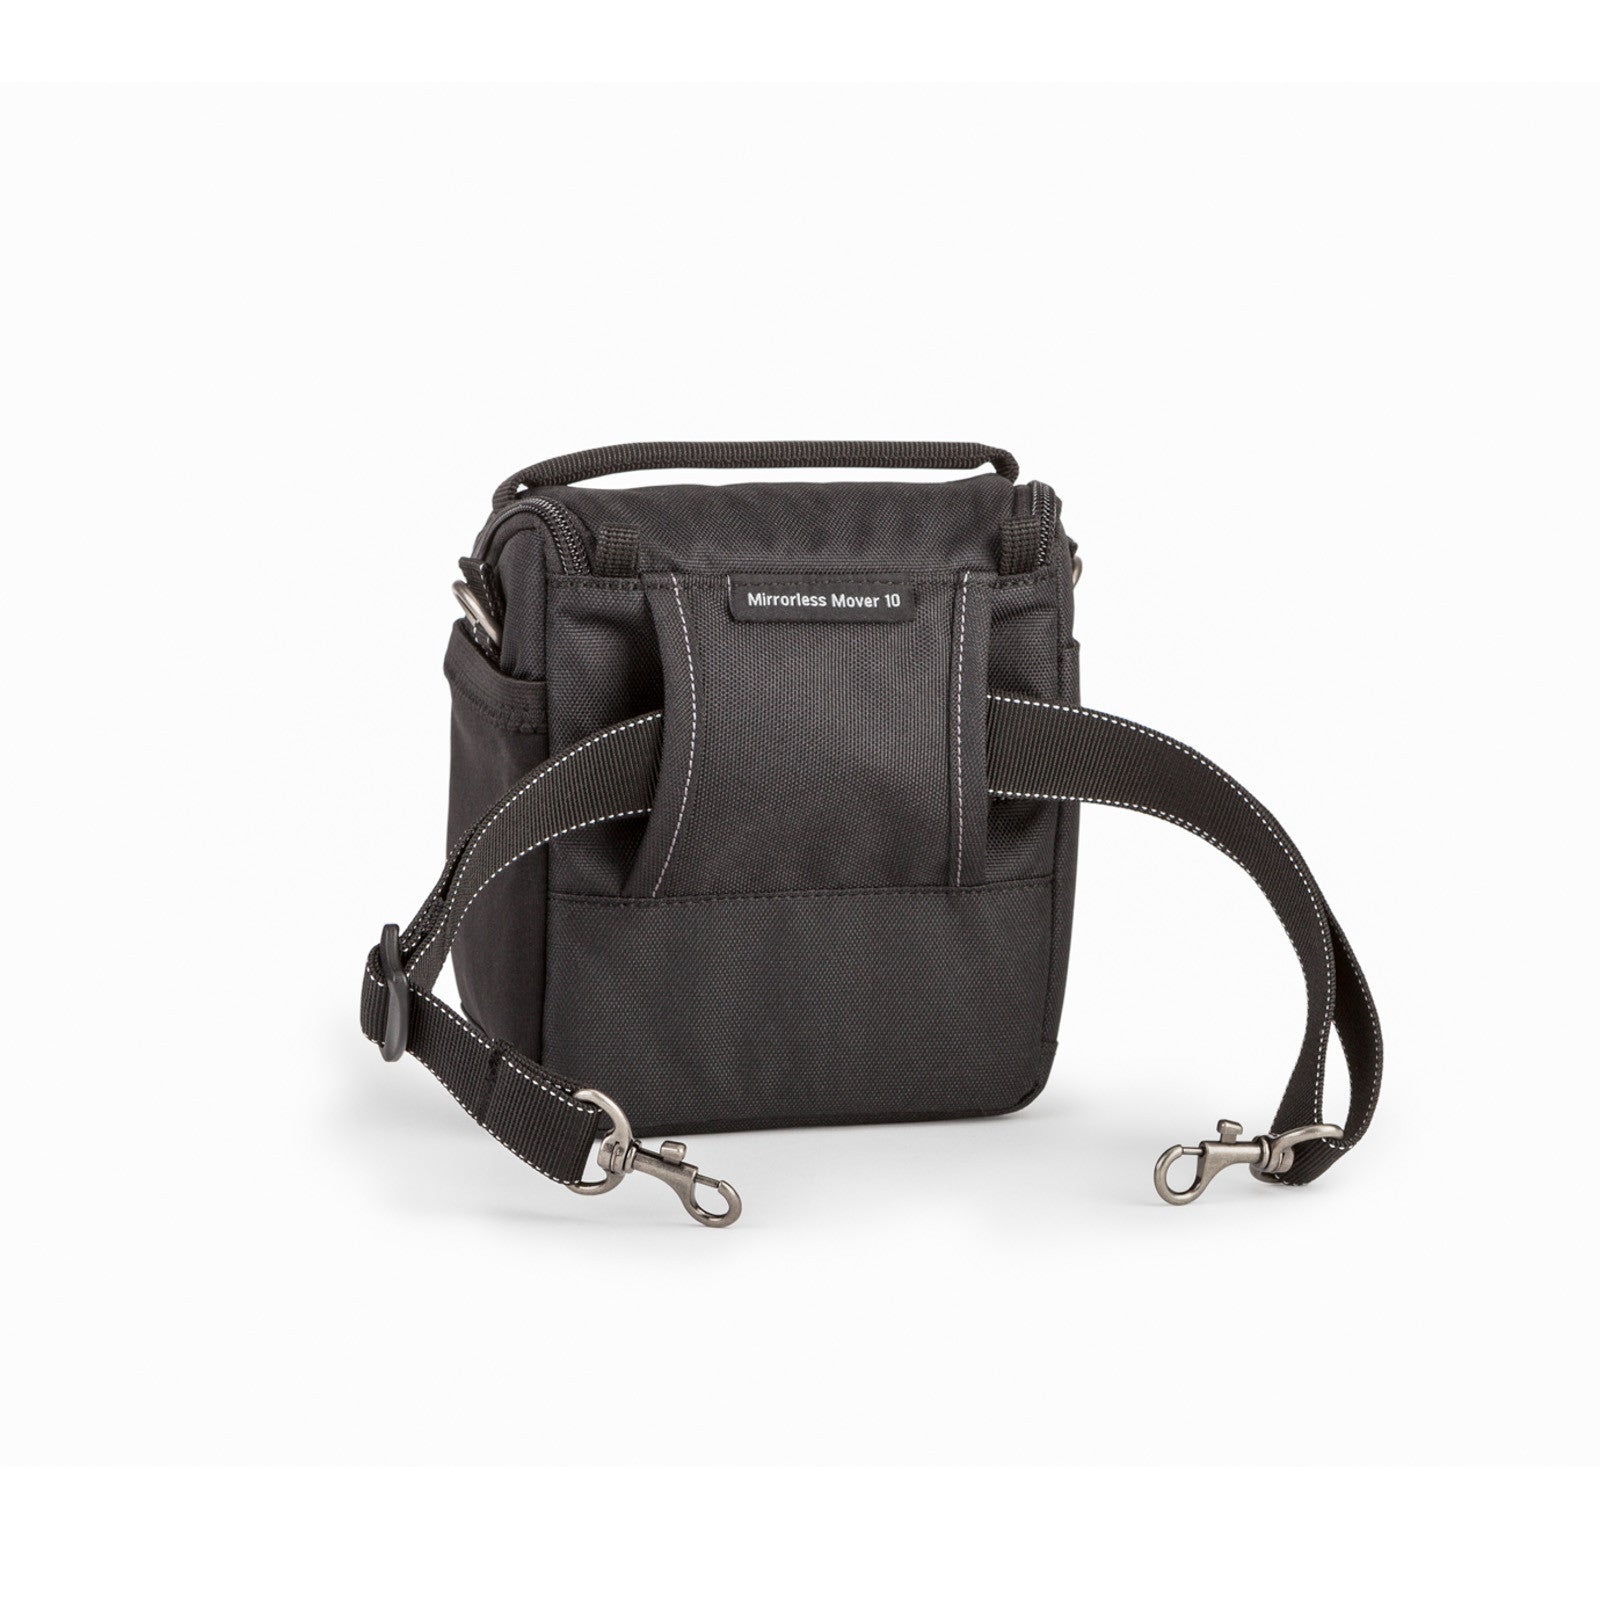 Think Tank Mirrorless Mover 10 Camera Bag (Charcoal), bags shoulder bags, Think Tank Photo - Pictureline  - 3